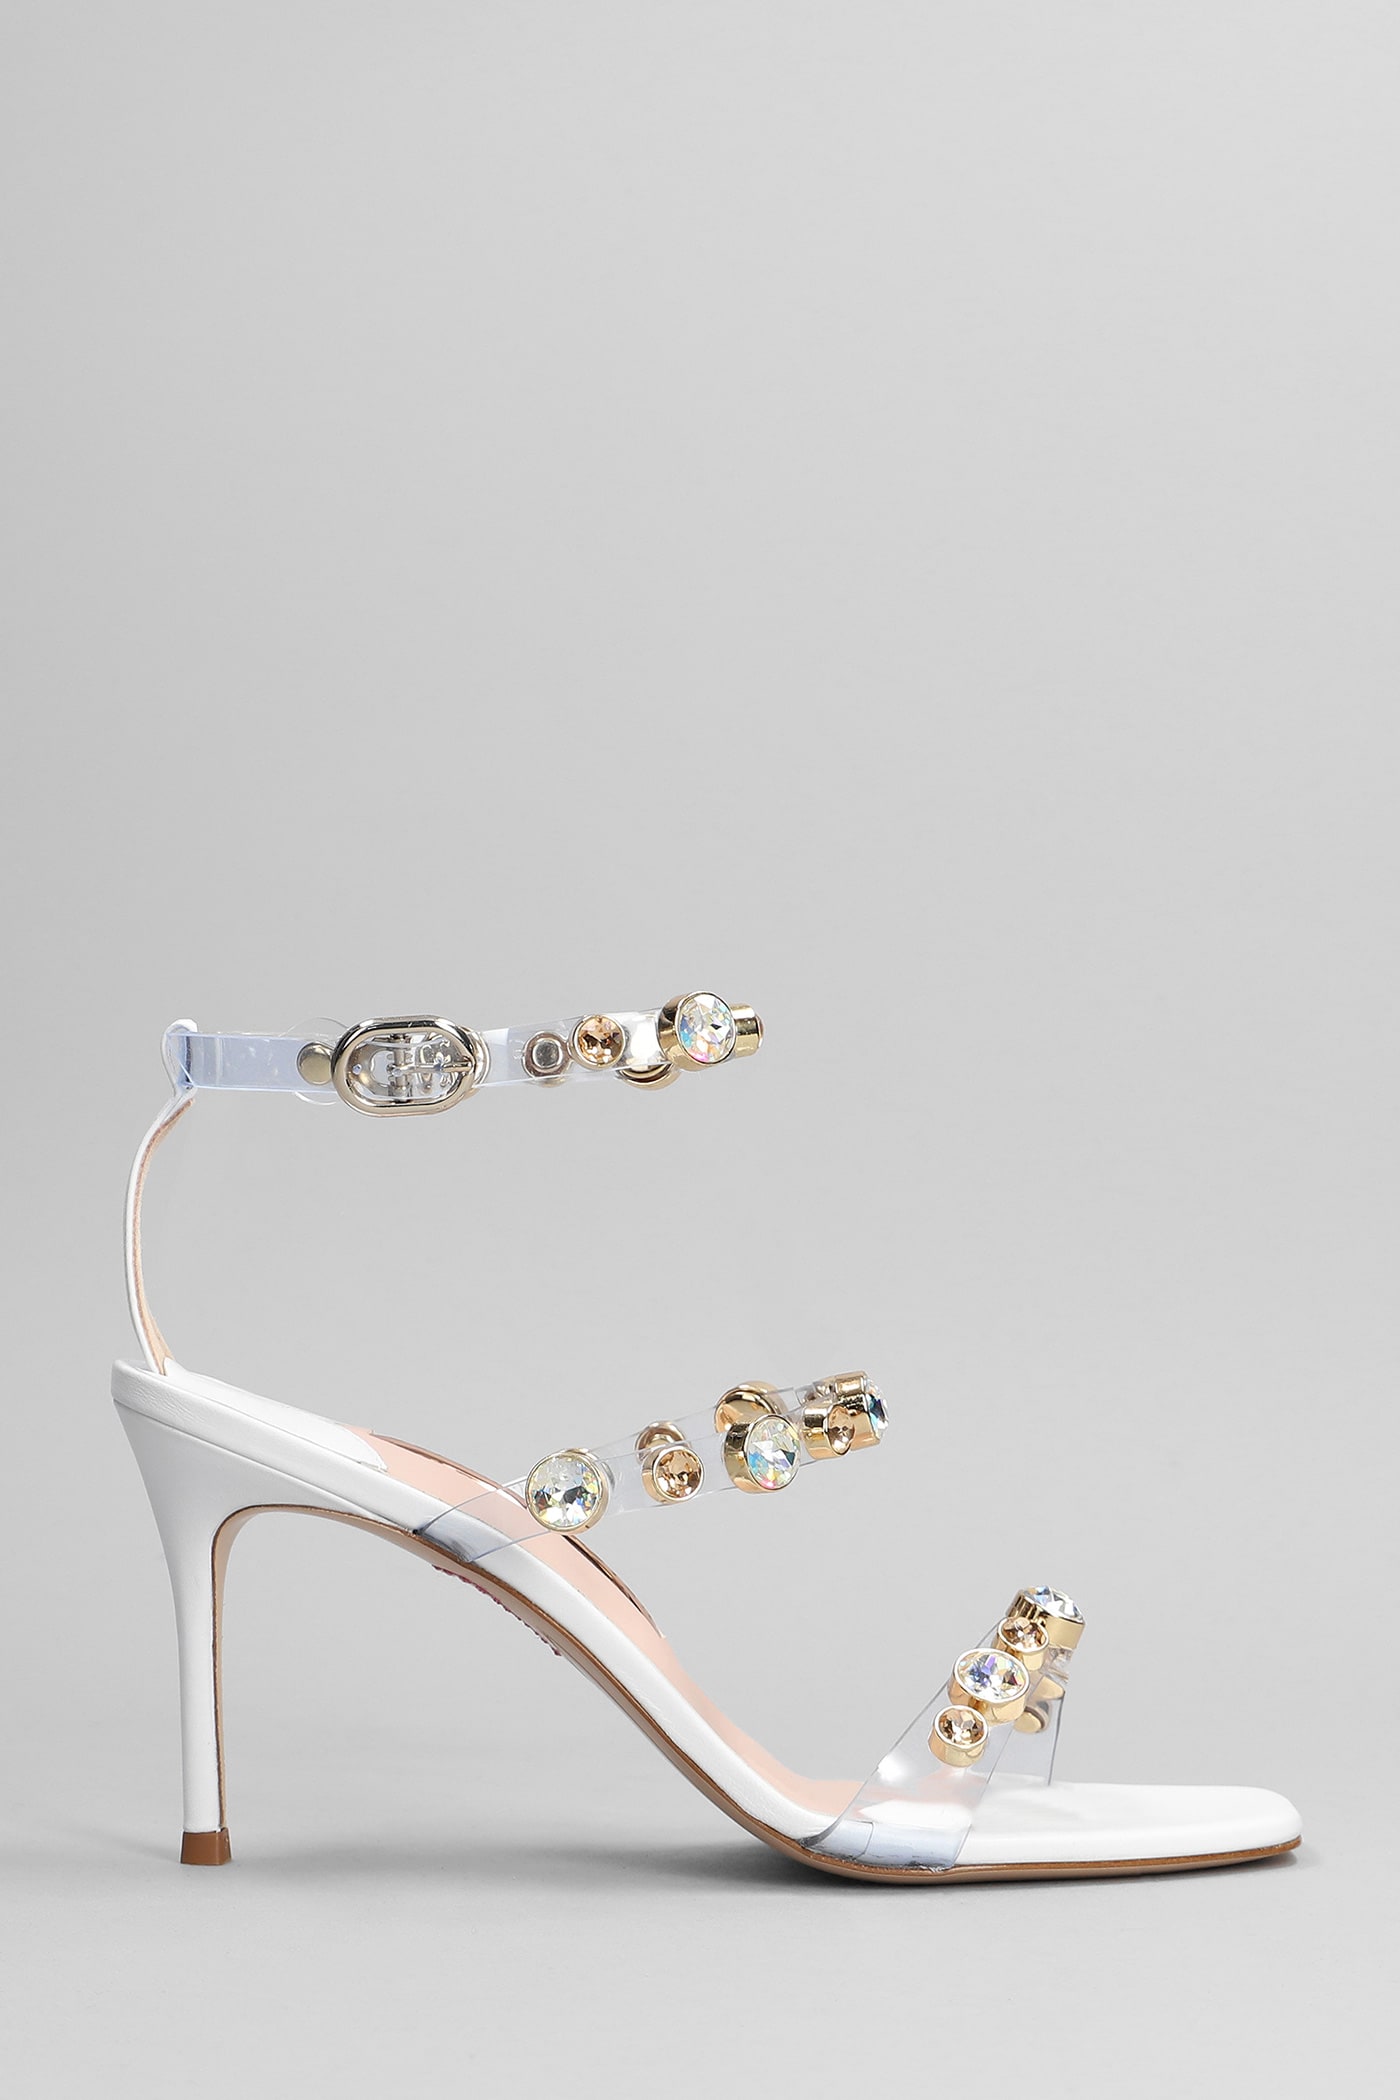 Sophia Webster Sandals In White Leather